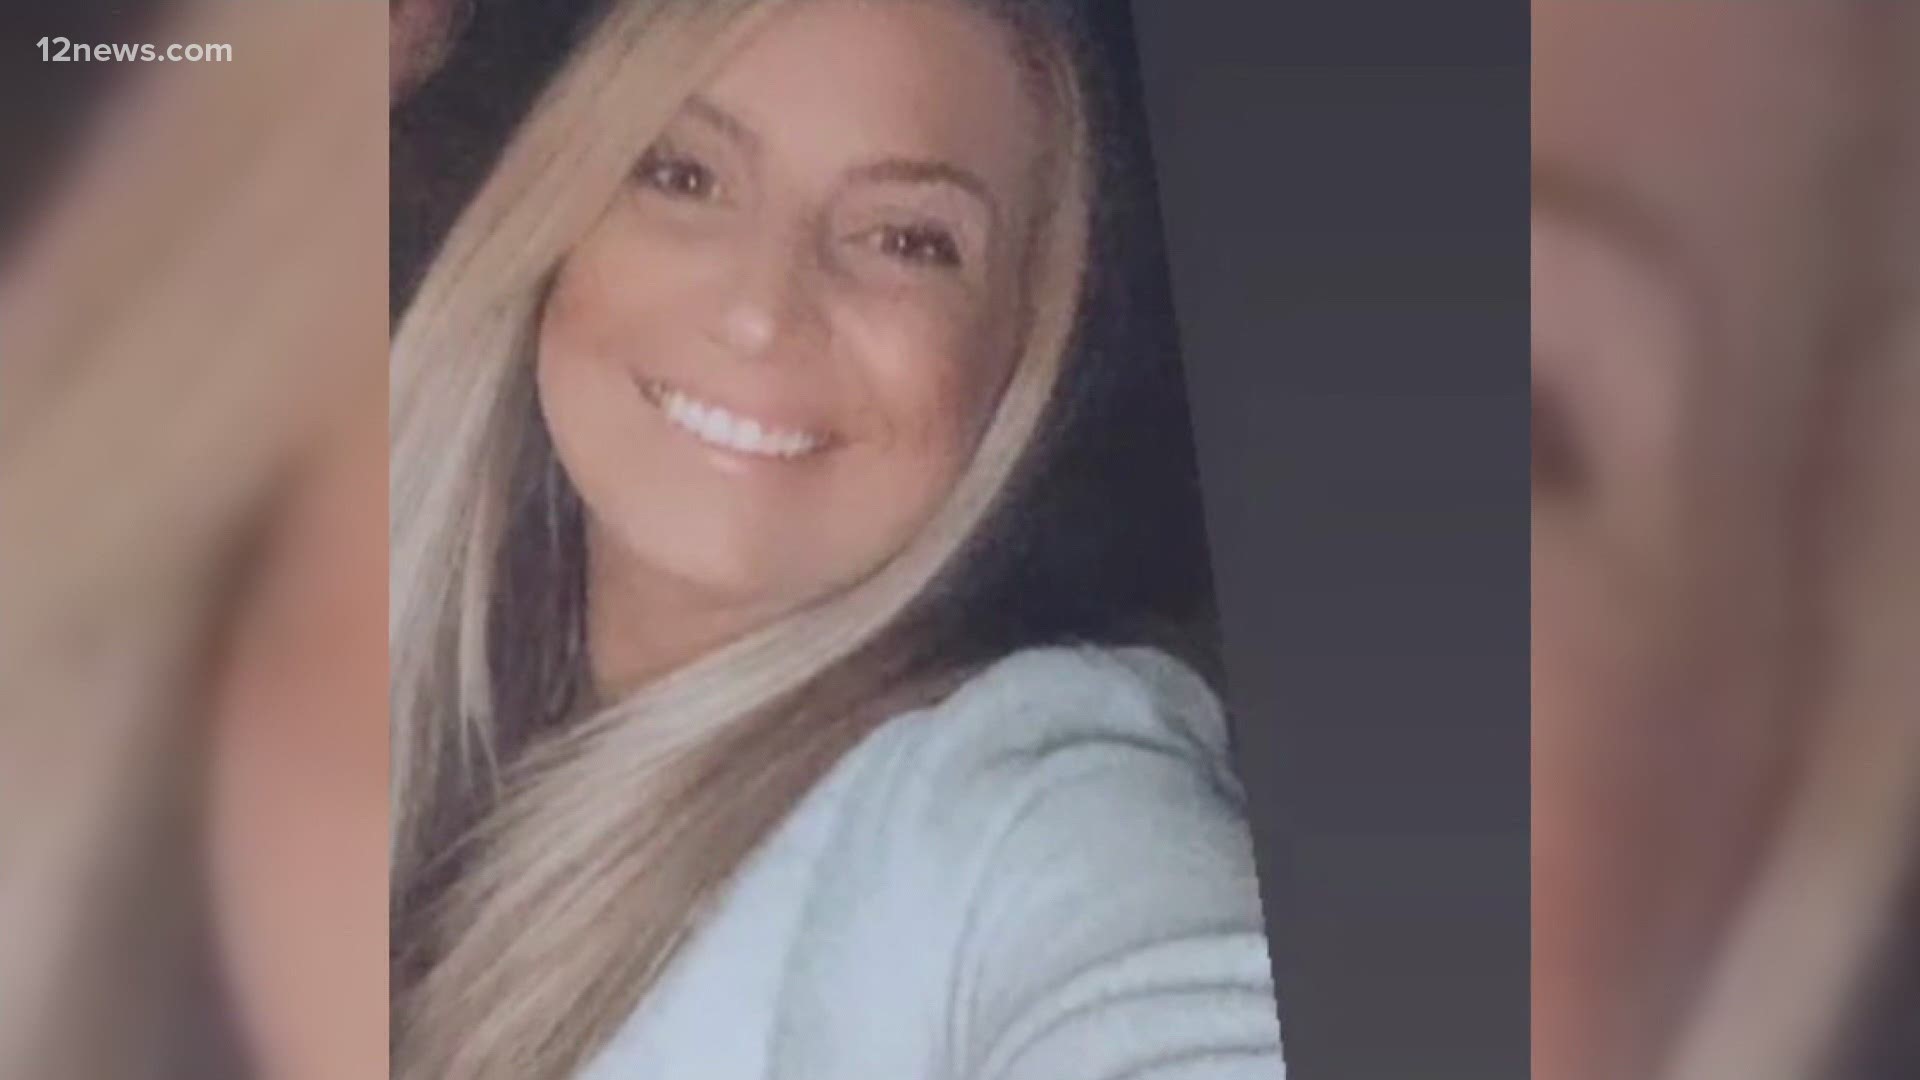 28-year-old Jessica Goodwin hasn't been seen since Monday. She didn't show up to her job and left her dog at home. Her car was found near a wash in Queen Creek.